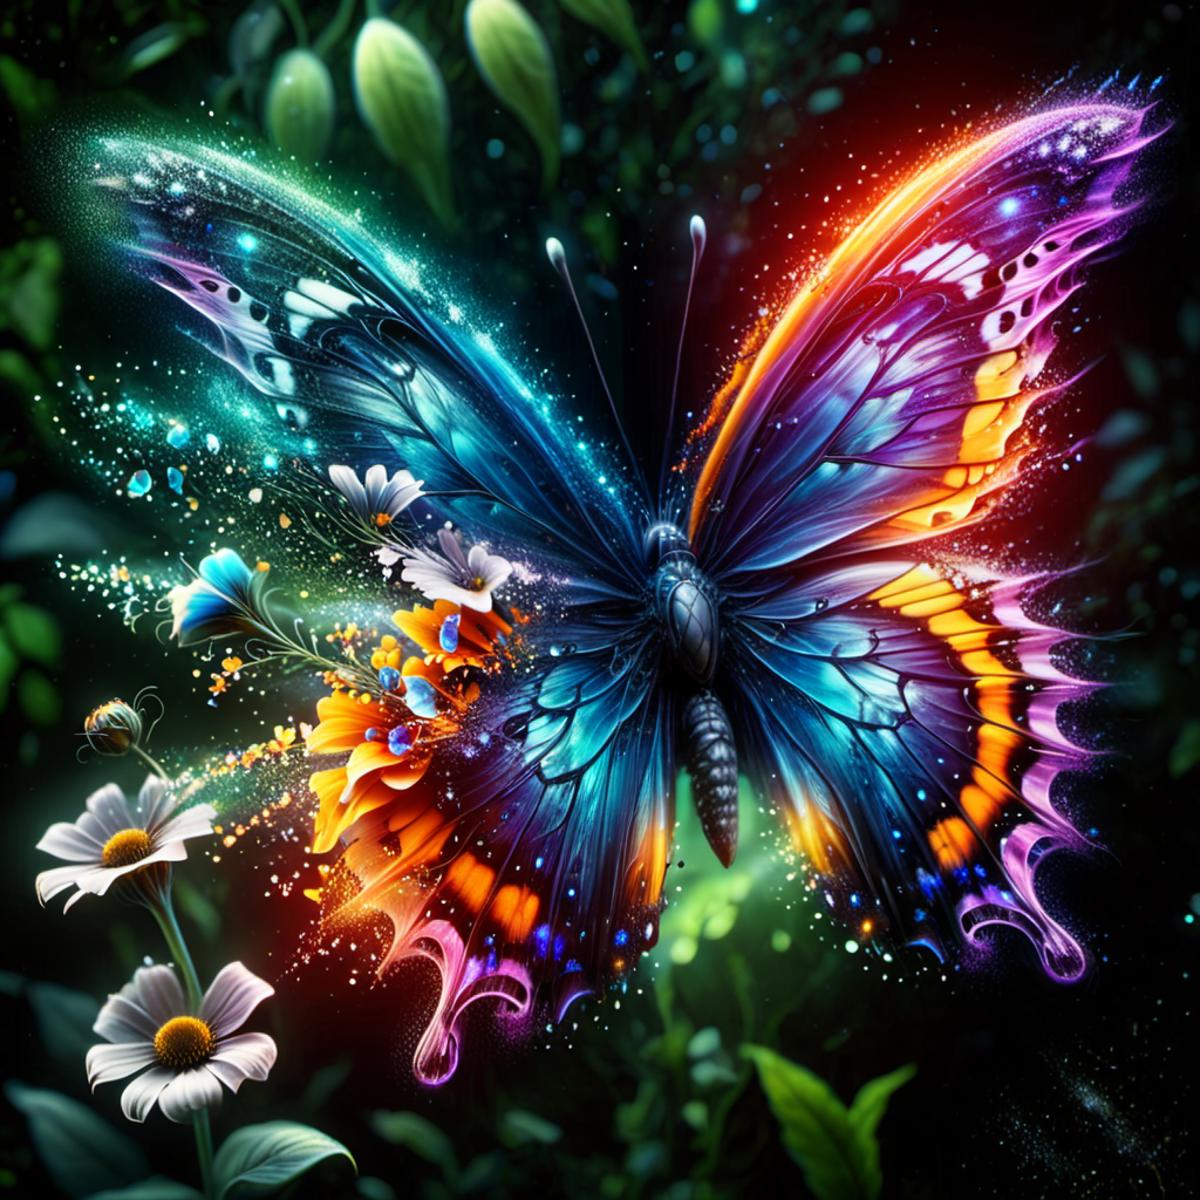 A colorful butterfly with a flower in its mouth, surrounded by a vibrant and lush garden.